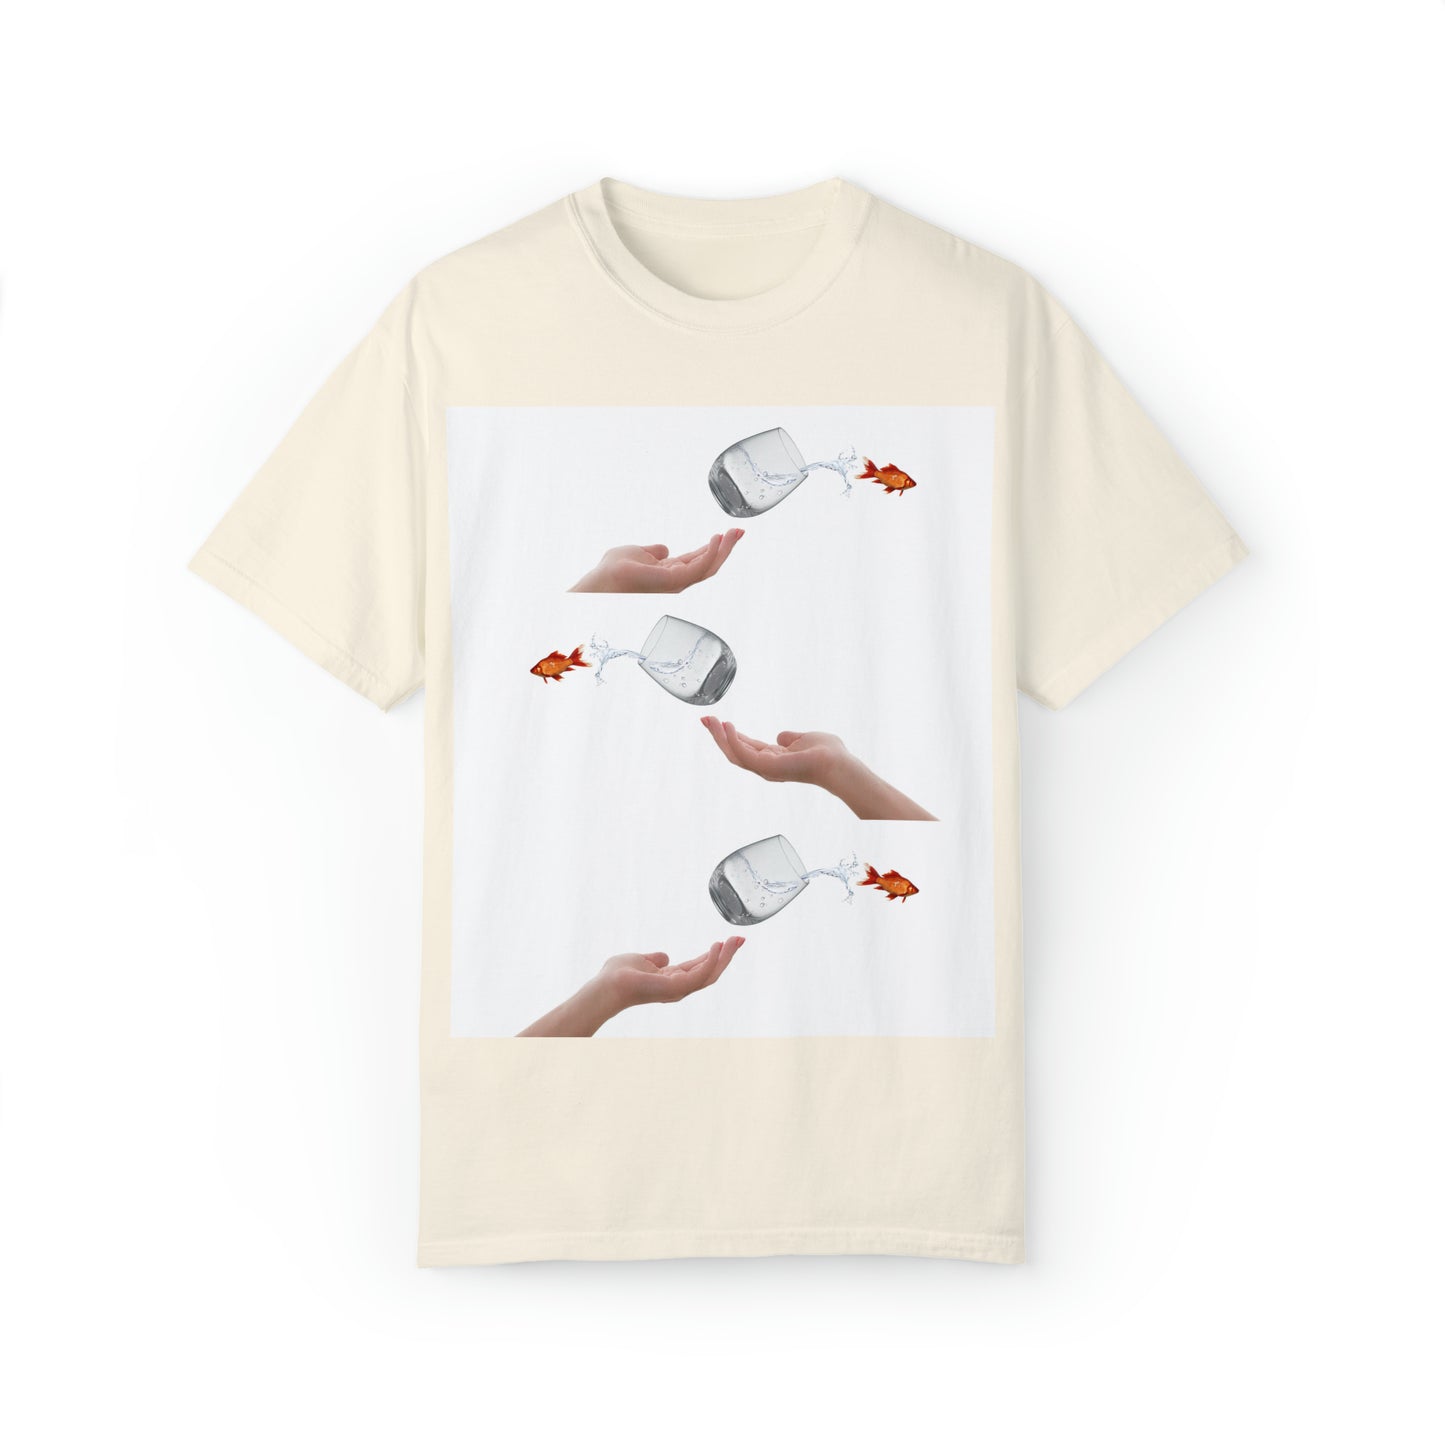 Don't feel like a fish out of water tshirt